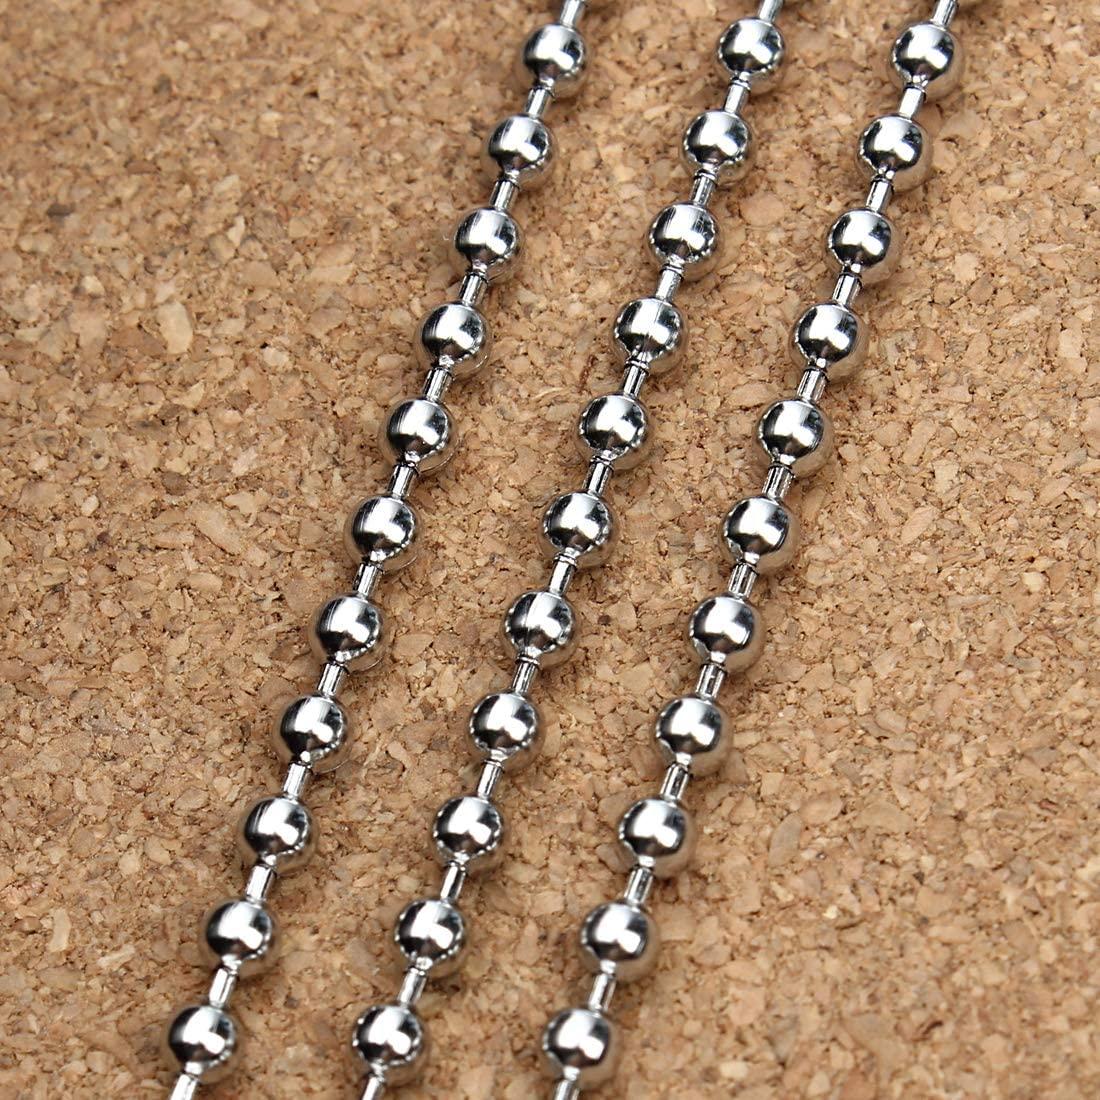 Tiparts 30 Feet Stainless Steel Ball Chains Necklace with 20pcs Connectors  Clasps,Silver Bead Chain Sets (Chain Width 2.4mm+20pcs connectors)